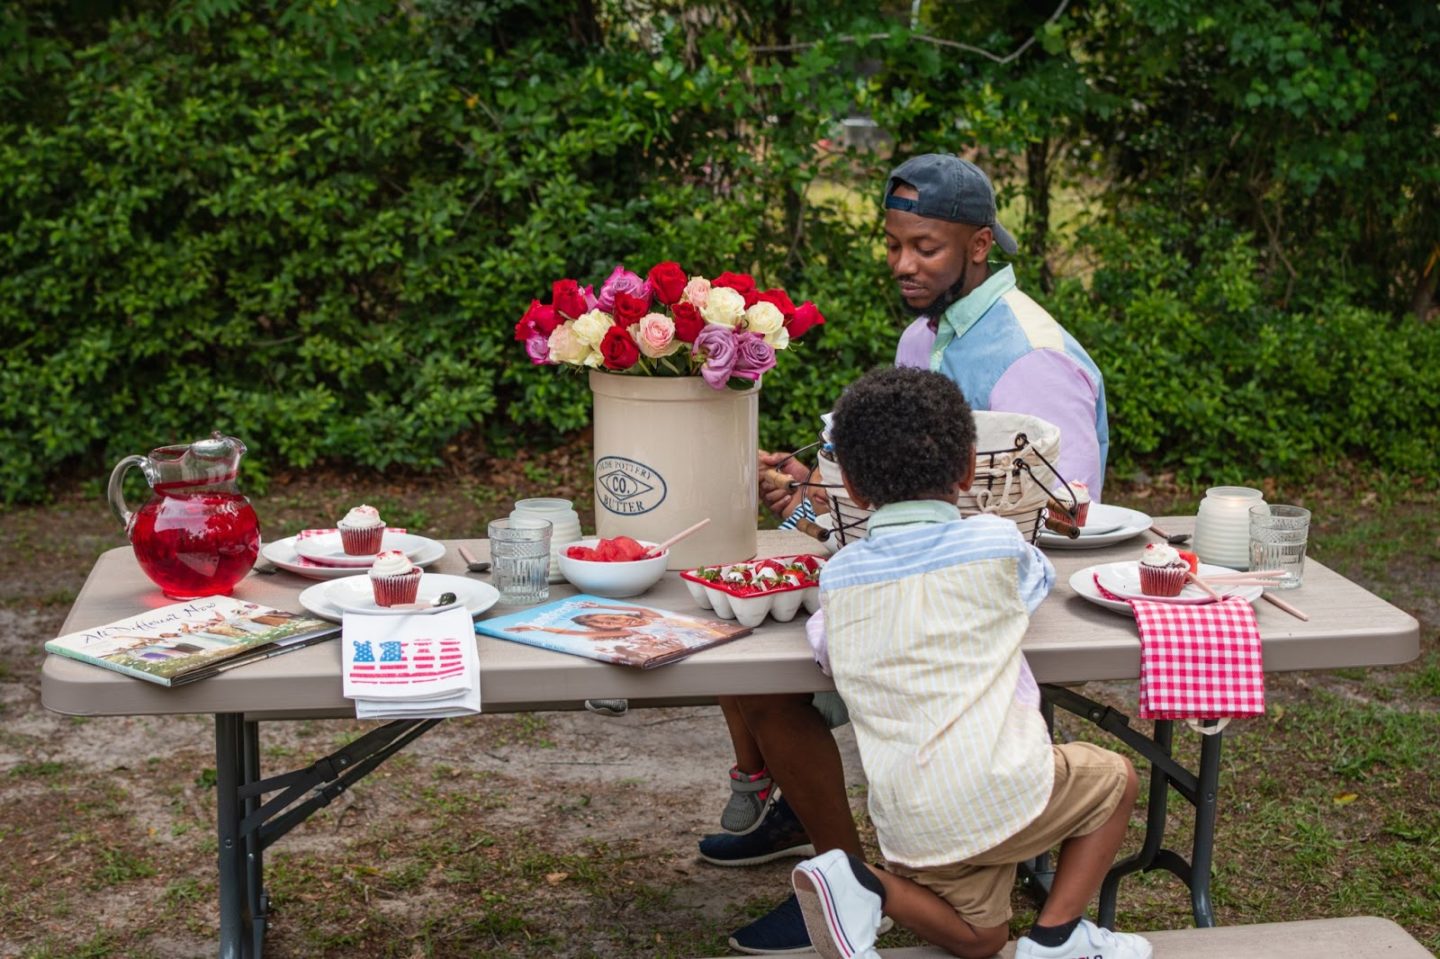 How to Host a Juneteenth Cookout with Little Kids